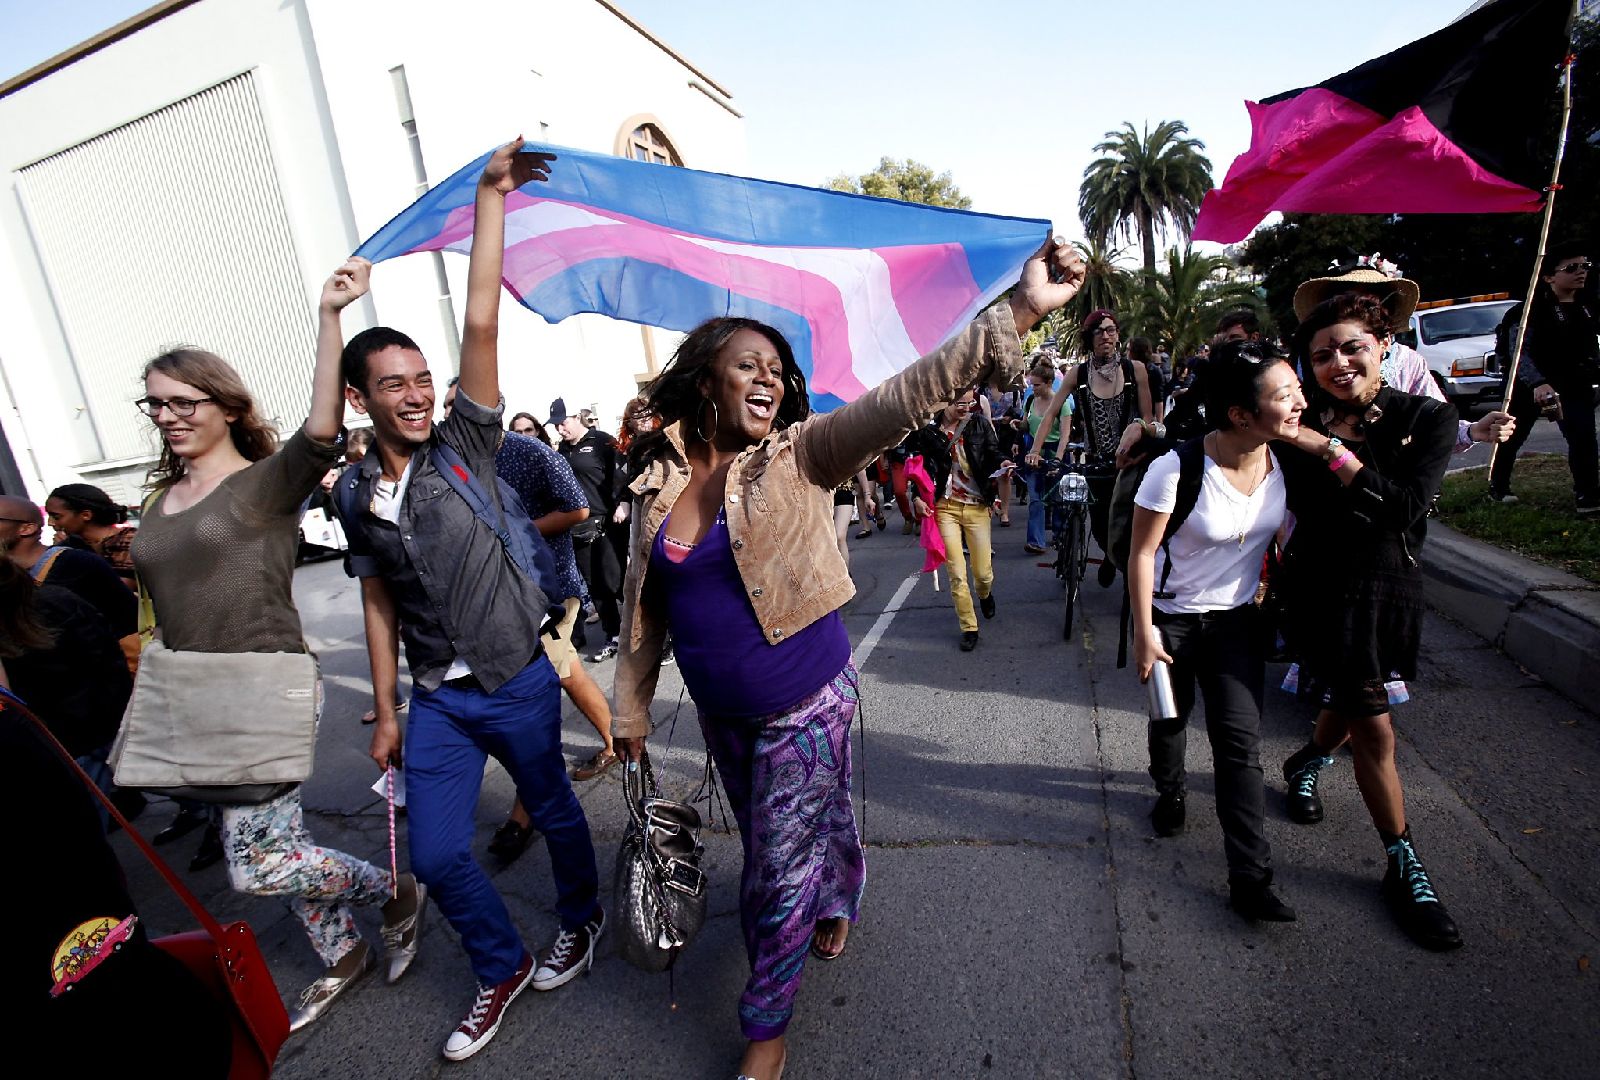 A crowd of folks march. Three people smile while holding up a trans flag that waves in the wind behind them.